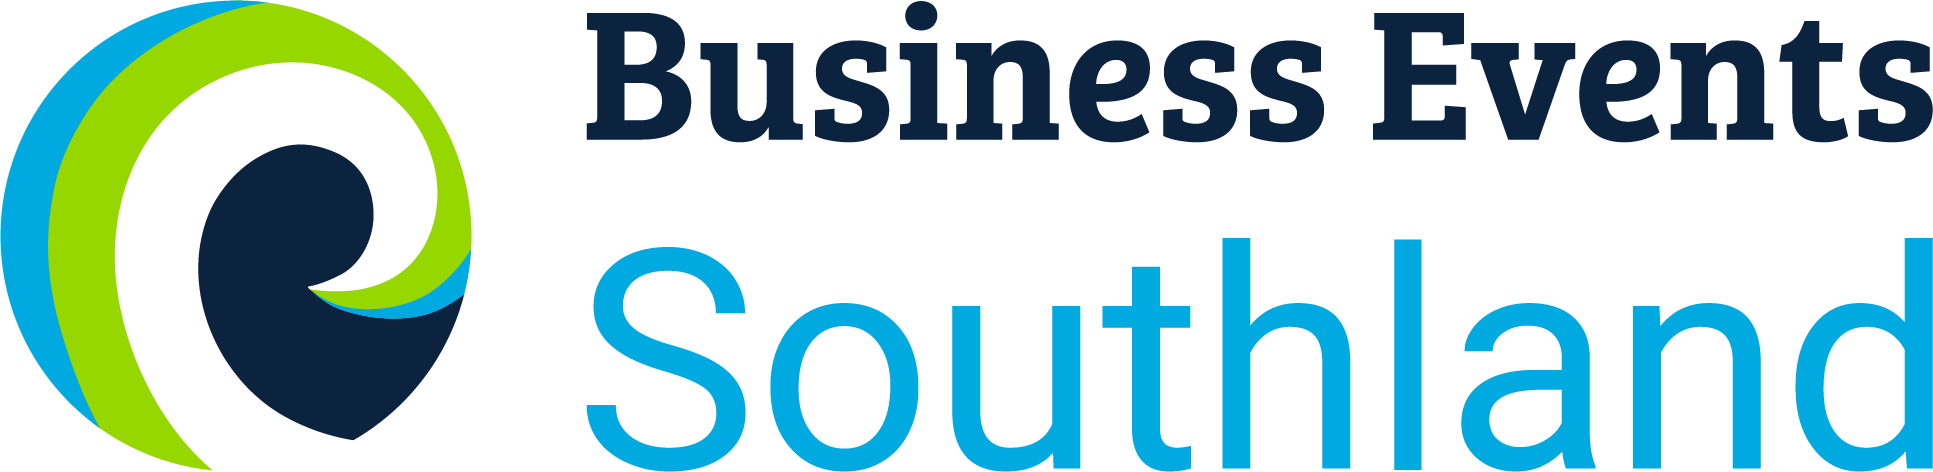 
Business Events Southland